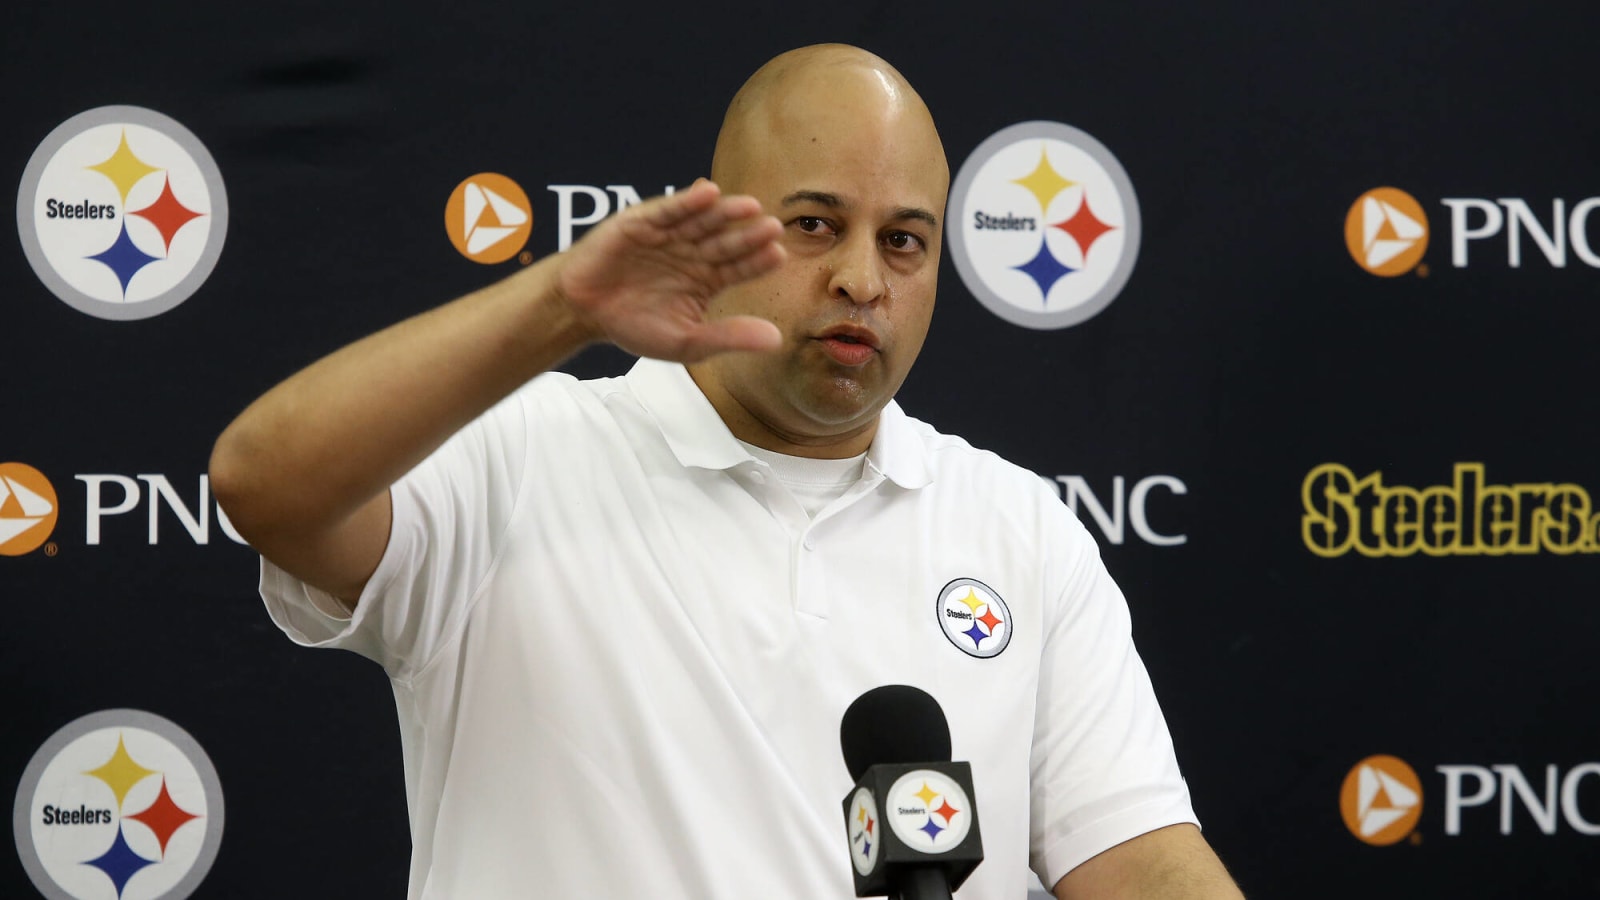 After great offseason, Steelers front office feeling unfortunate effects of one massive mistake